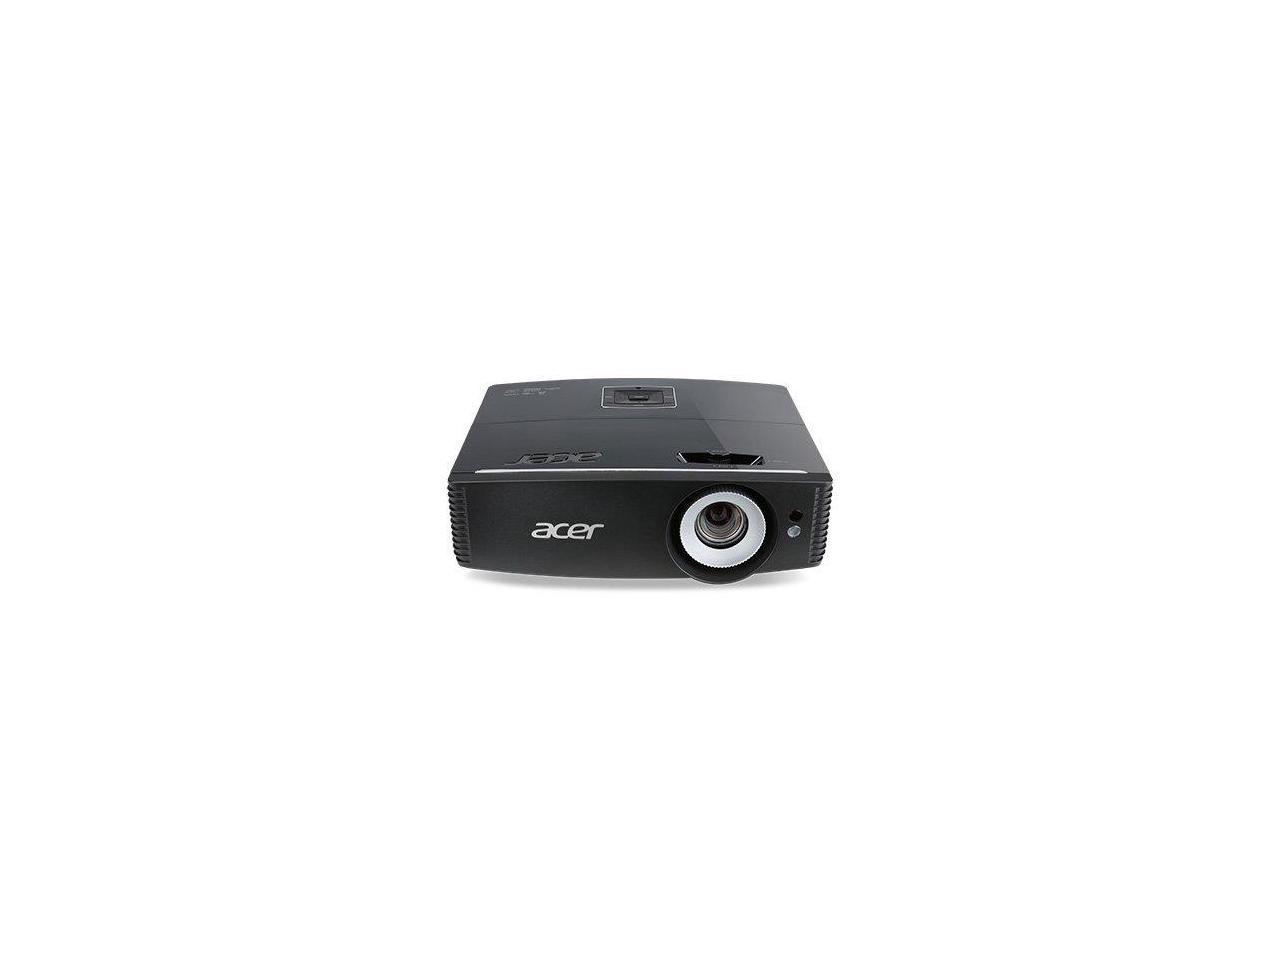 Acer P6500 1920 x 1080, 5000 lumens, 20,000:1 Contract Ratio, HDMI Input, Home Theater Projector